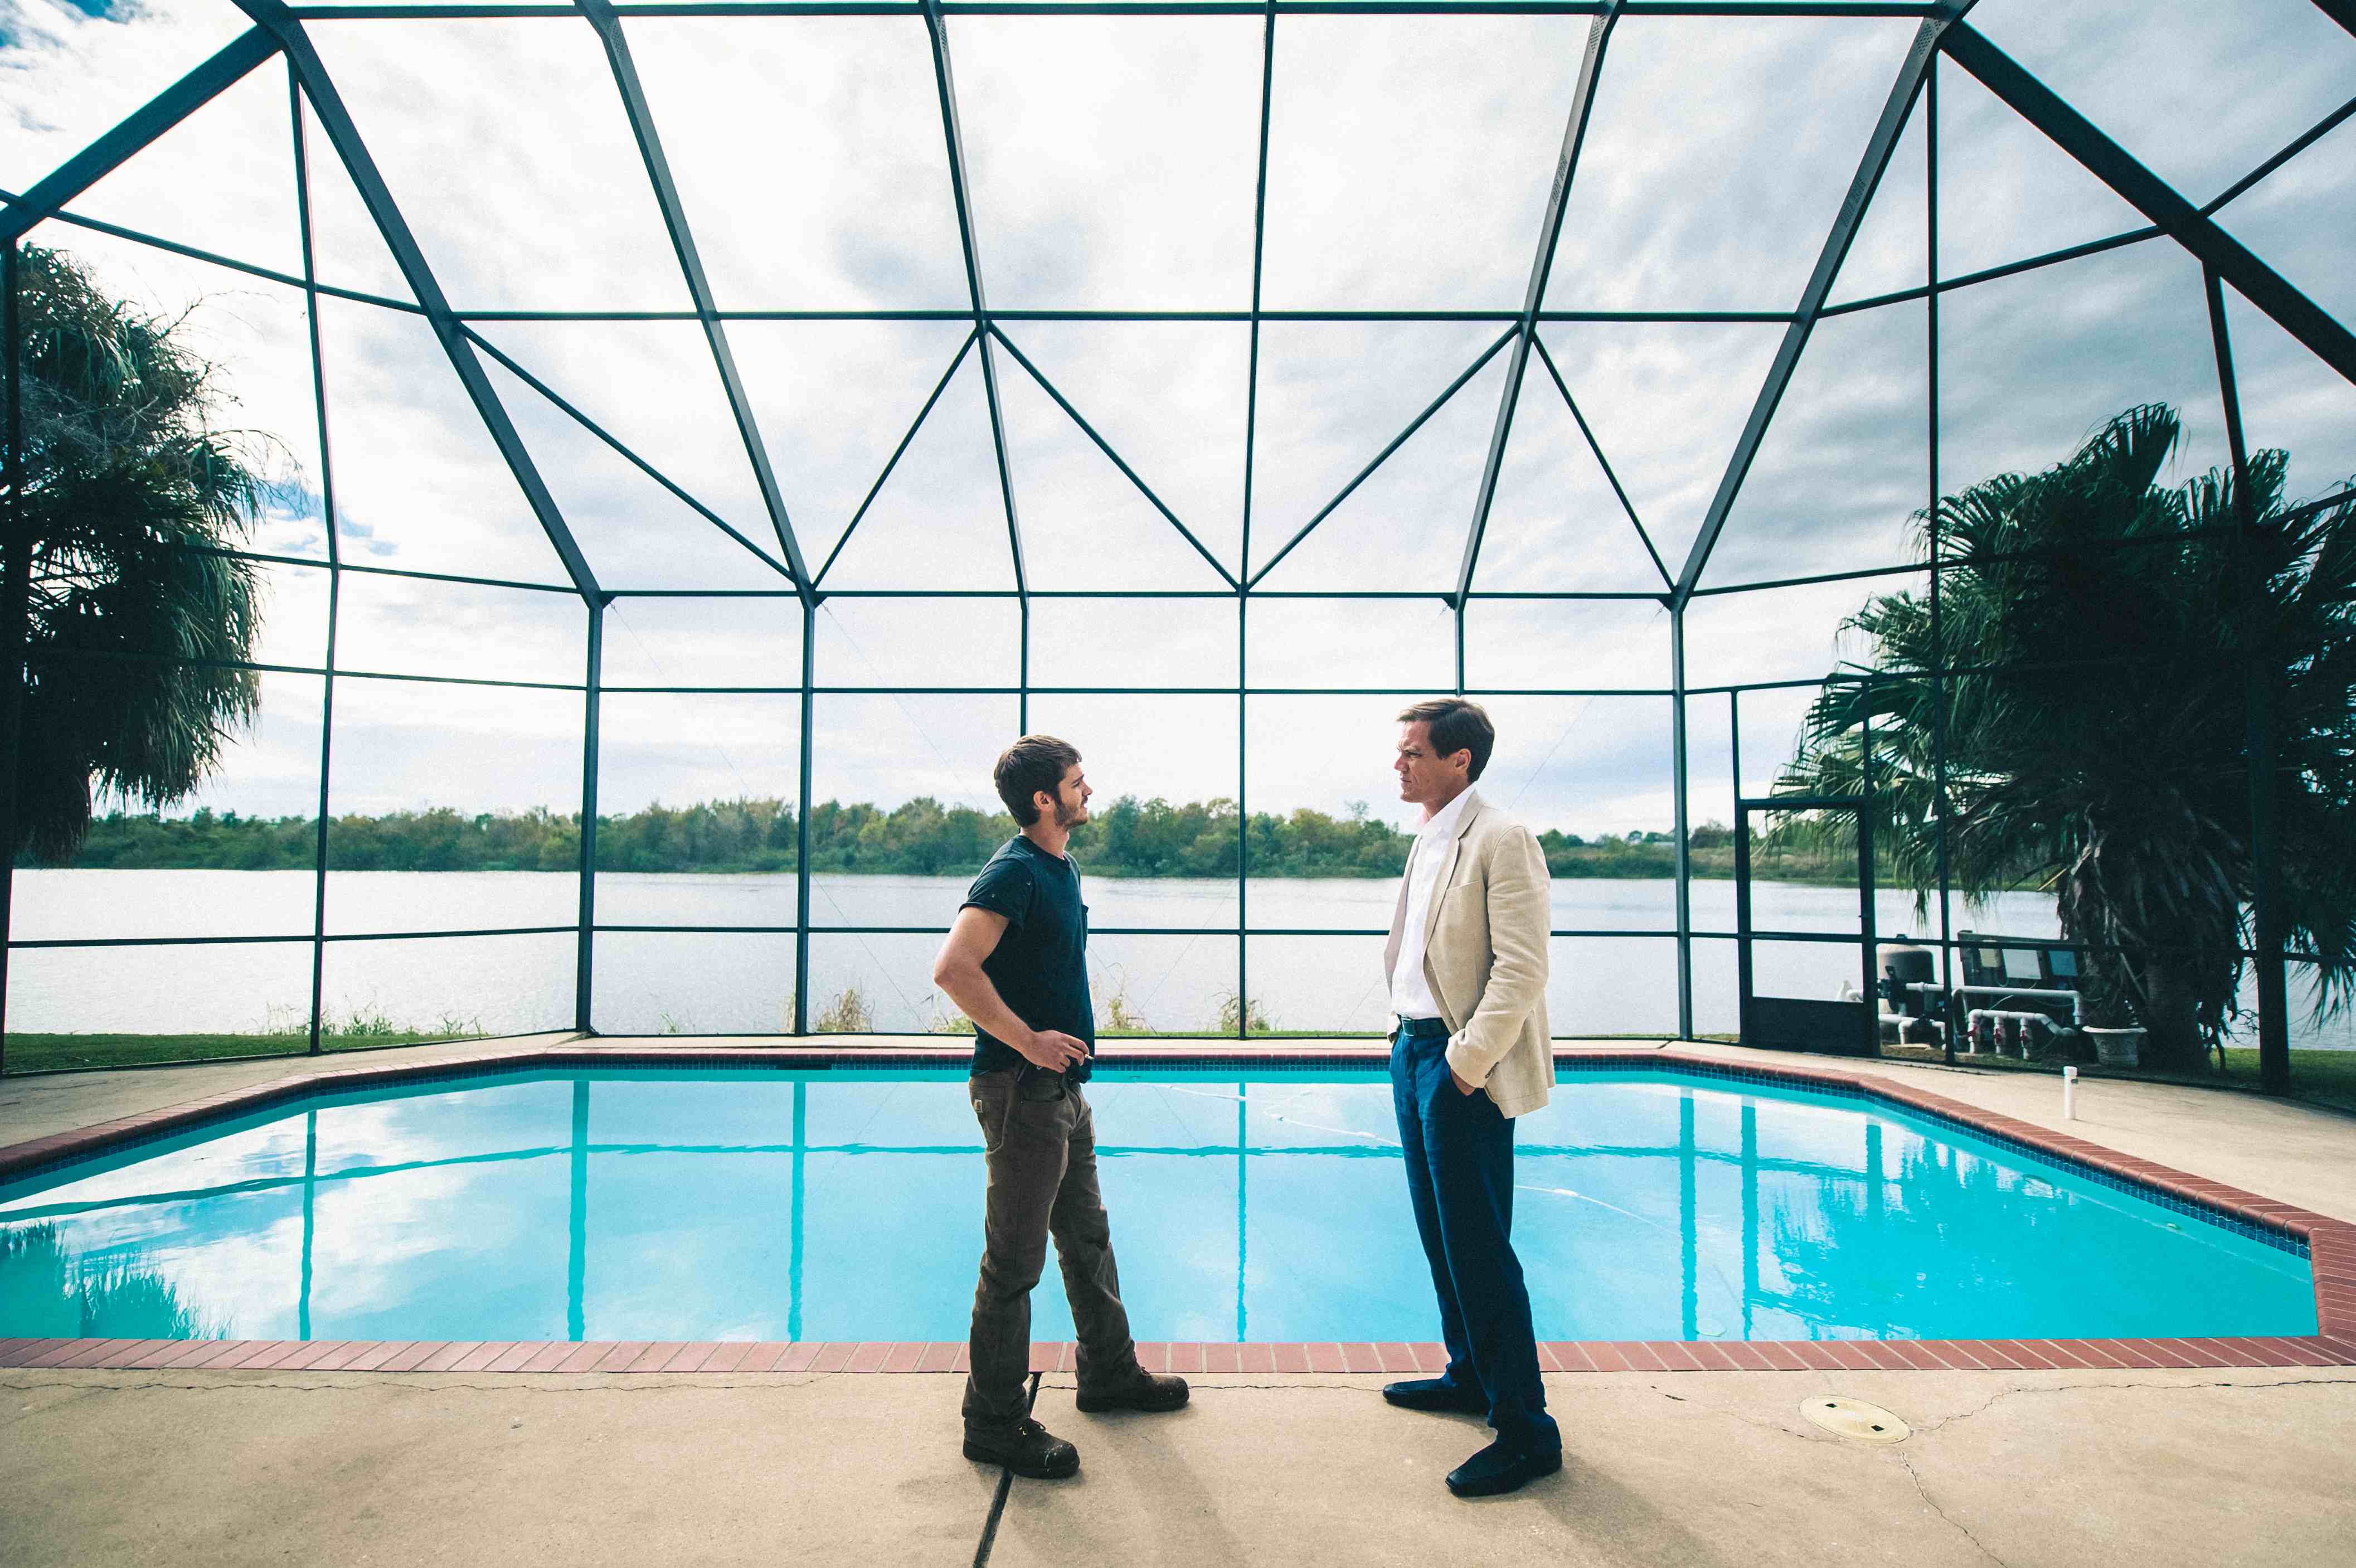 99 HOMES - Image du film 11 Michael Shannon Andrew Garfield - Go with the Blog